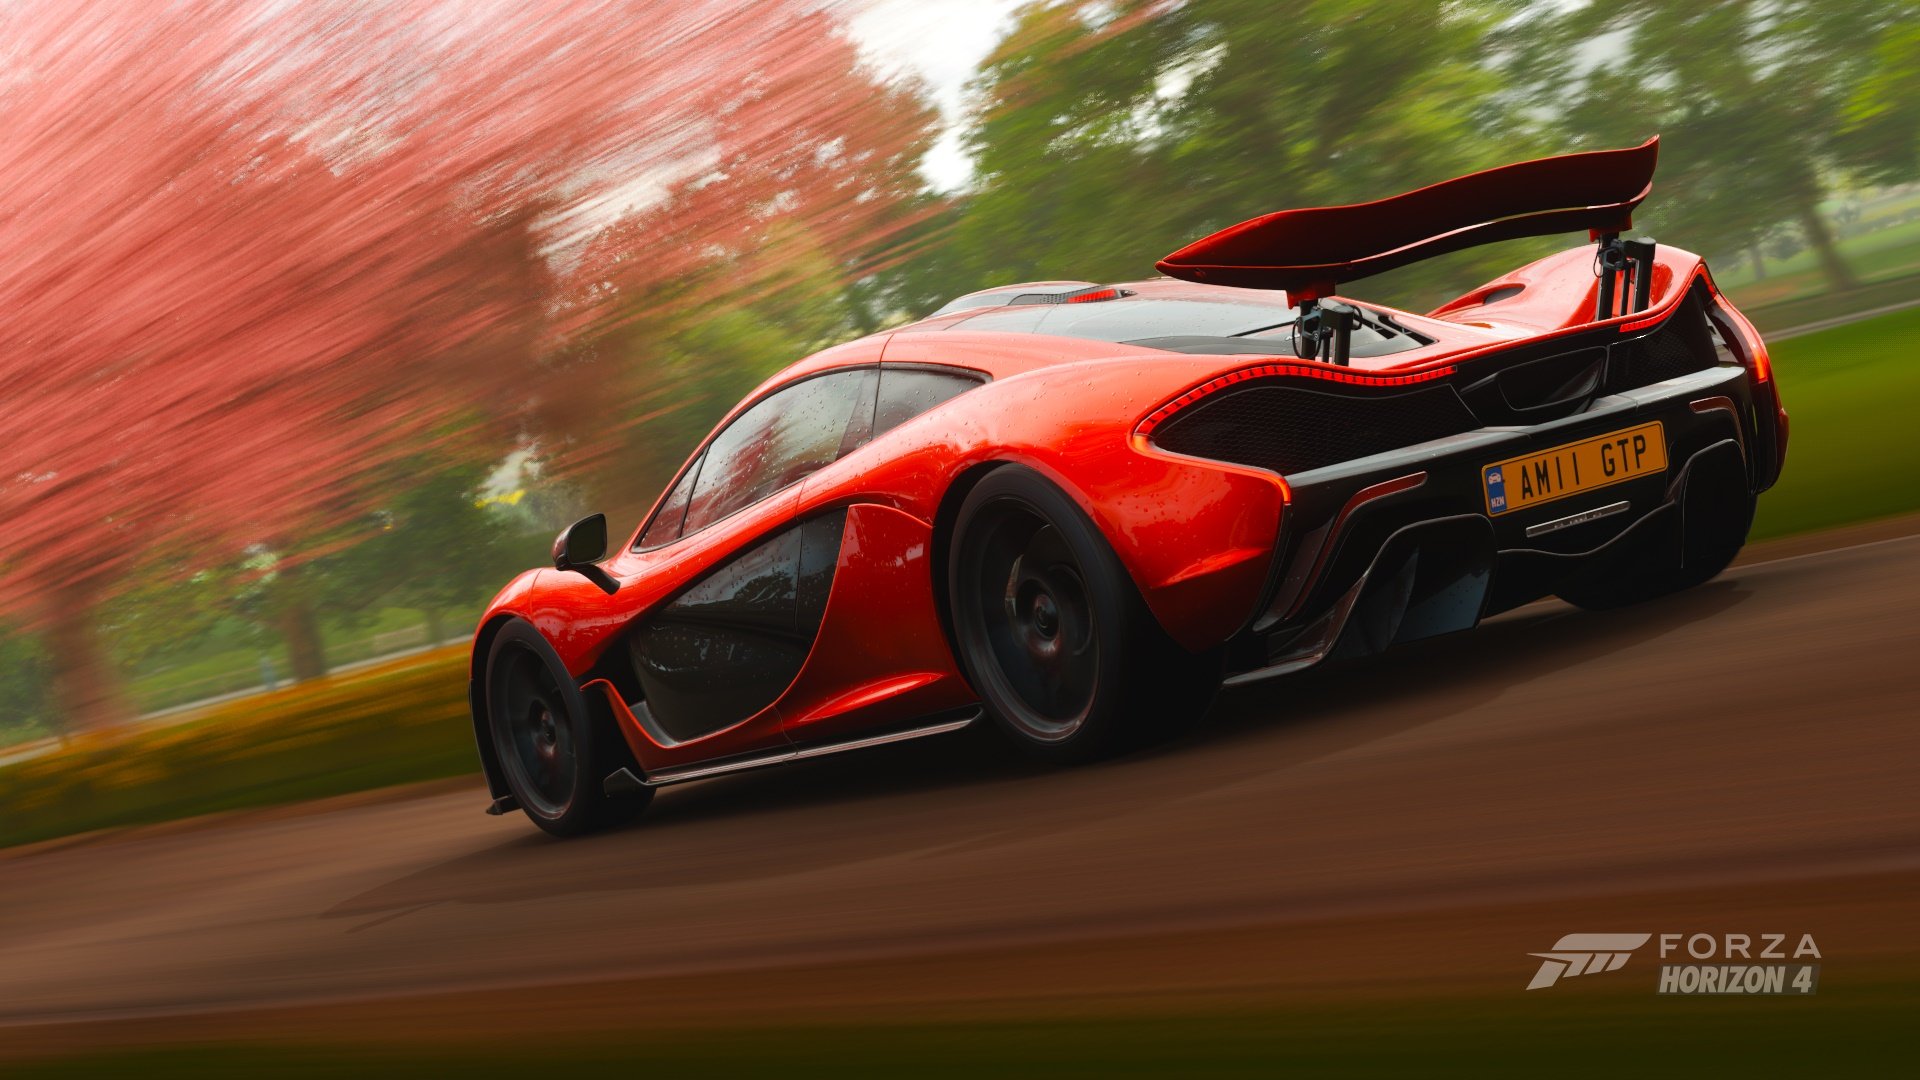 Forza Horizon 4 hands-on: For every race there is a season - CNET